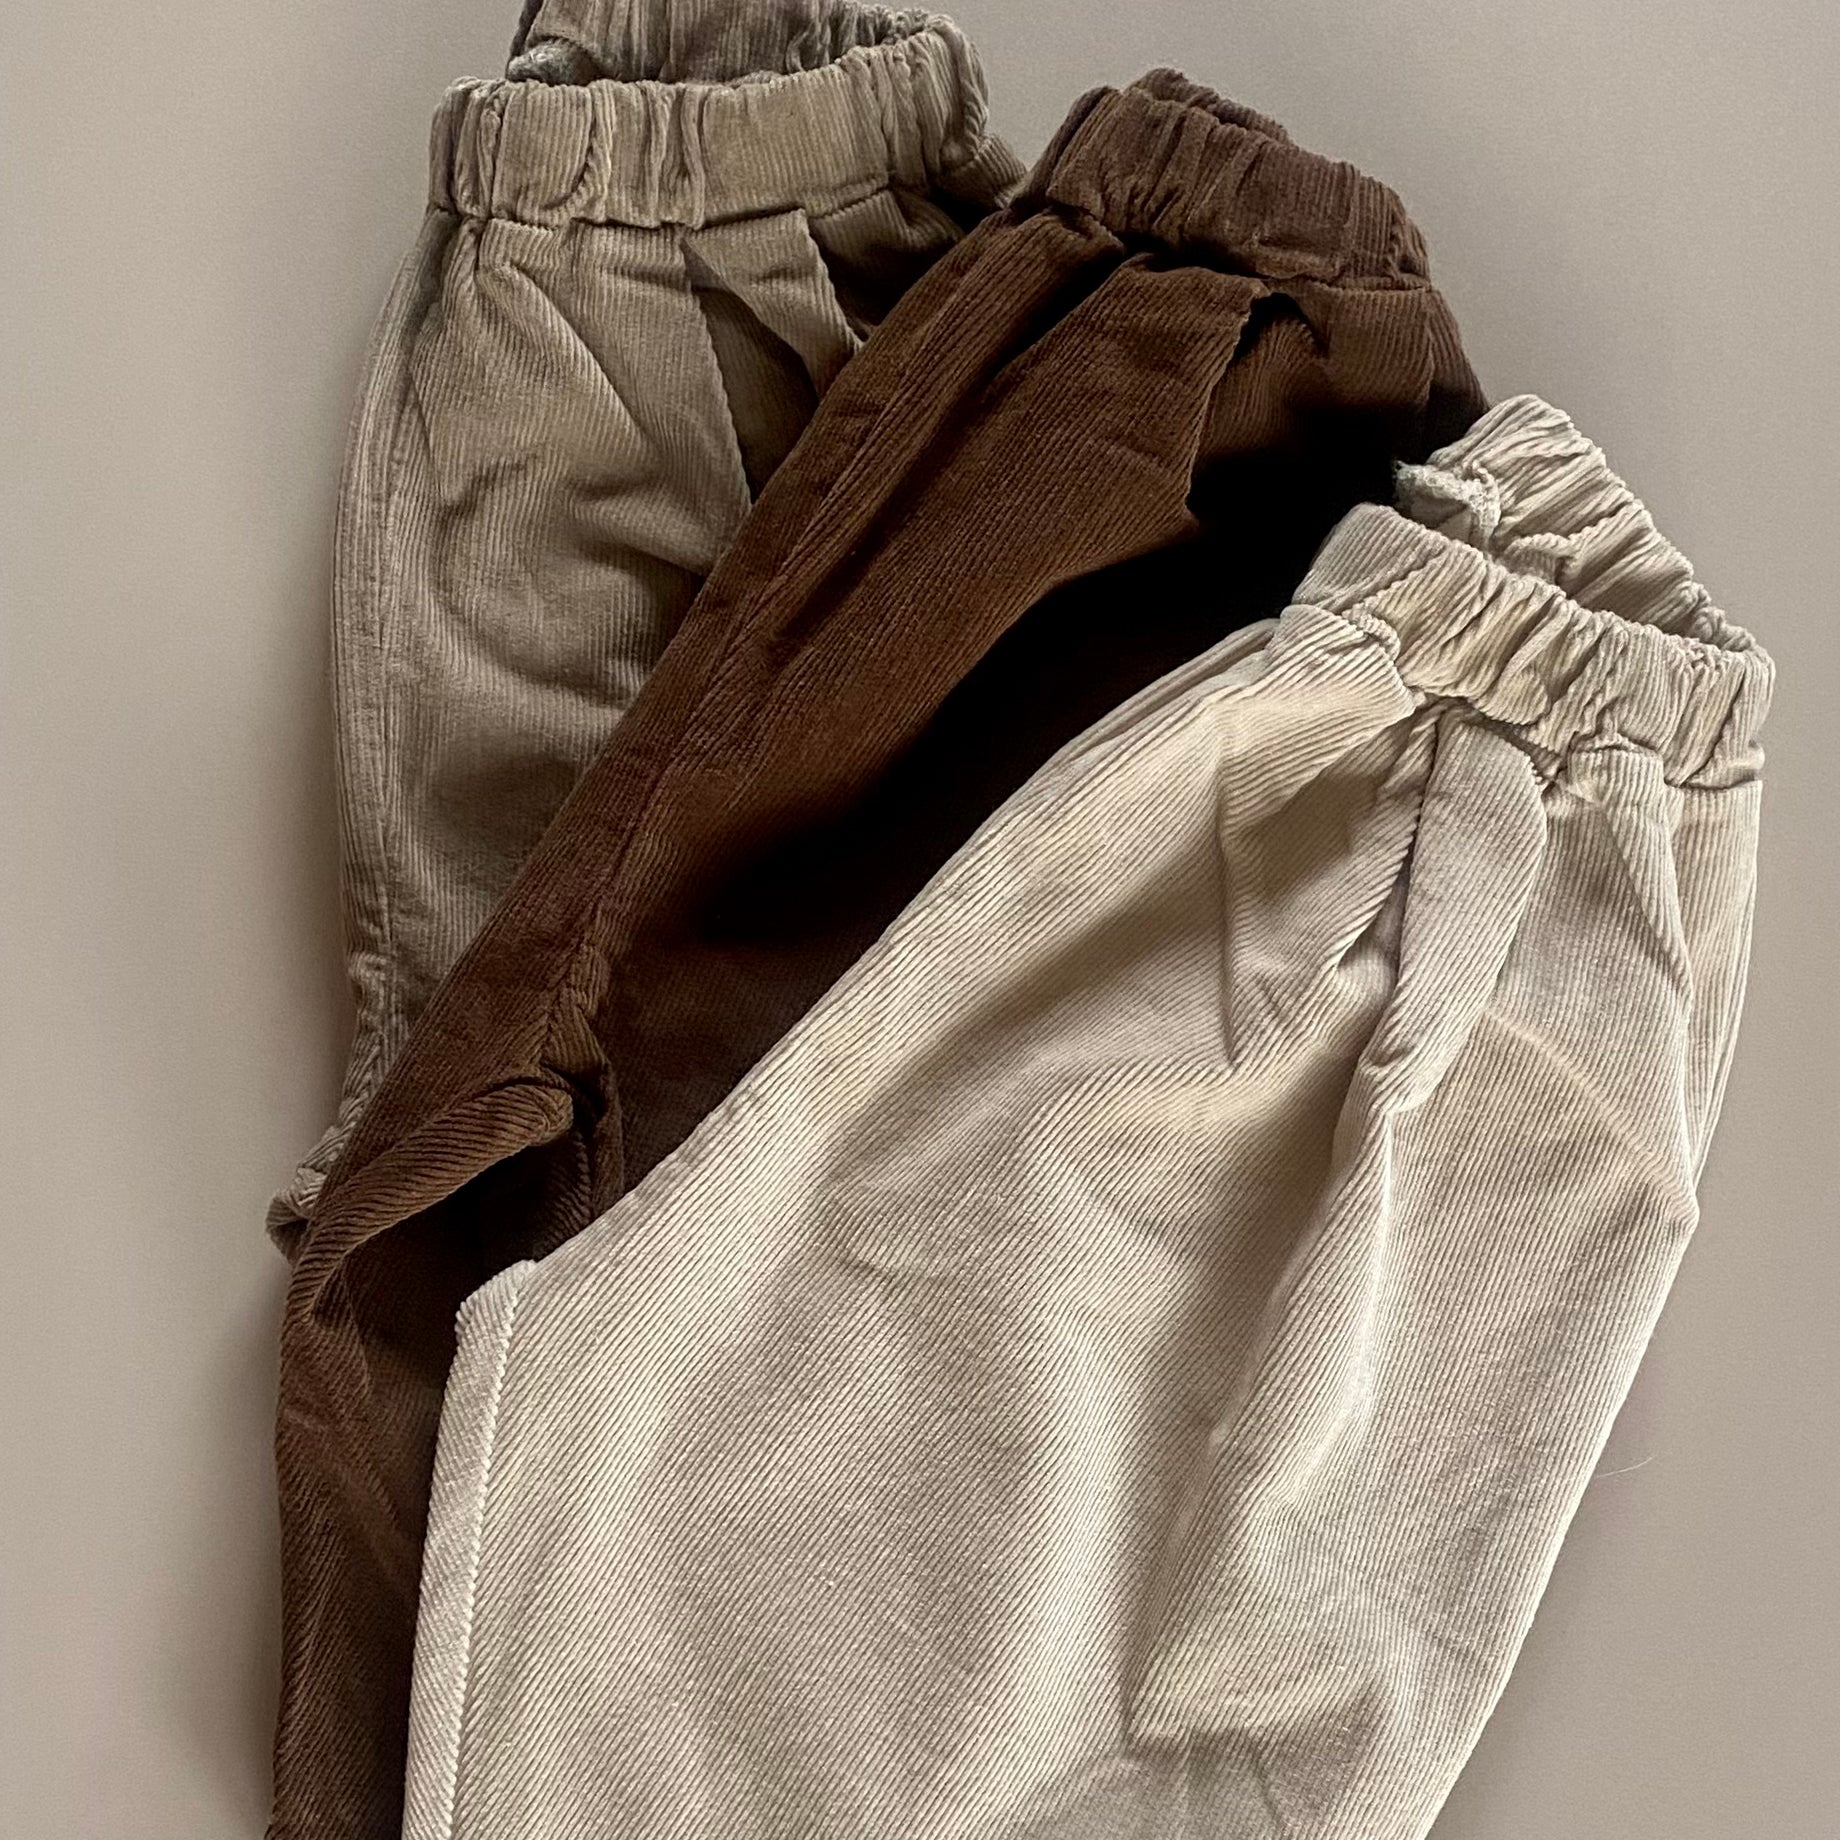 Finger Pants - Corduroy Brown find Stylish Fashion for Little People- at Little Foxx Concept Store